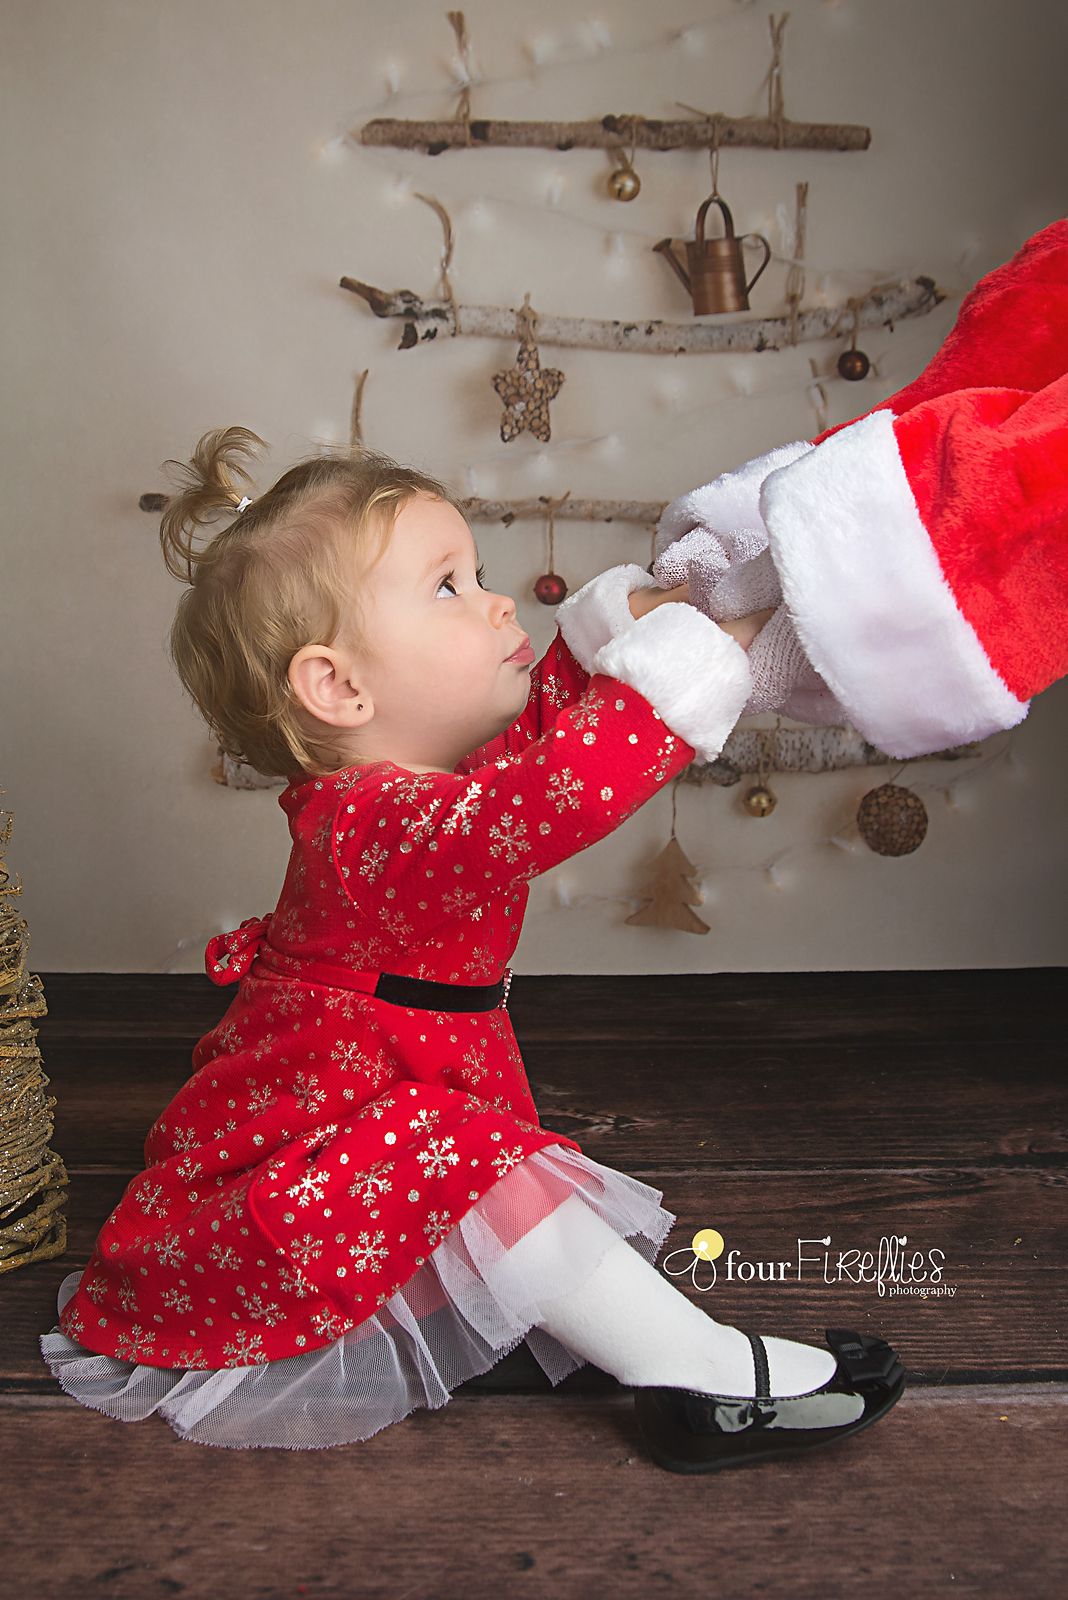 St-Louis-photographer-holiday-mini-sessions-2017-girl-in-red-dress-holding-santas-hands.jpg